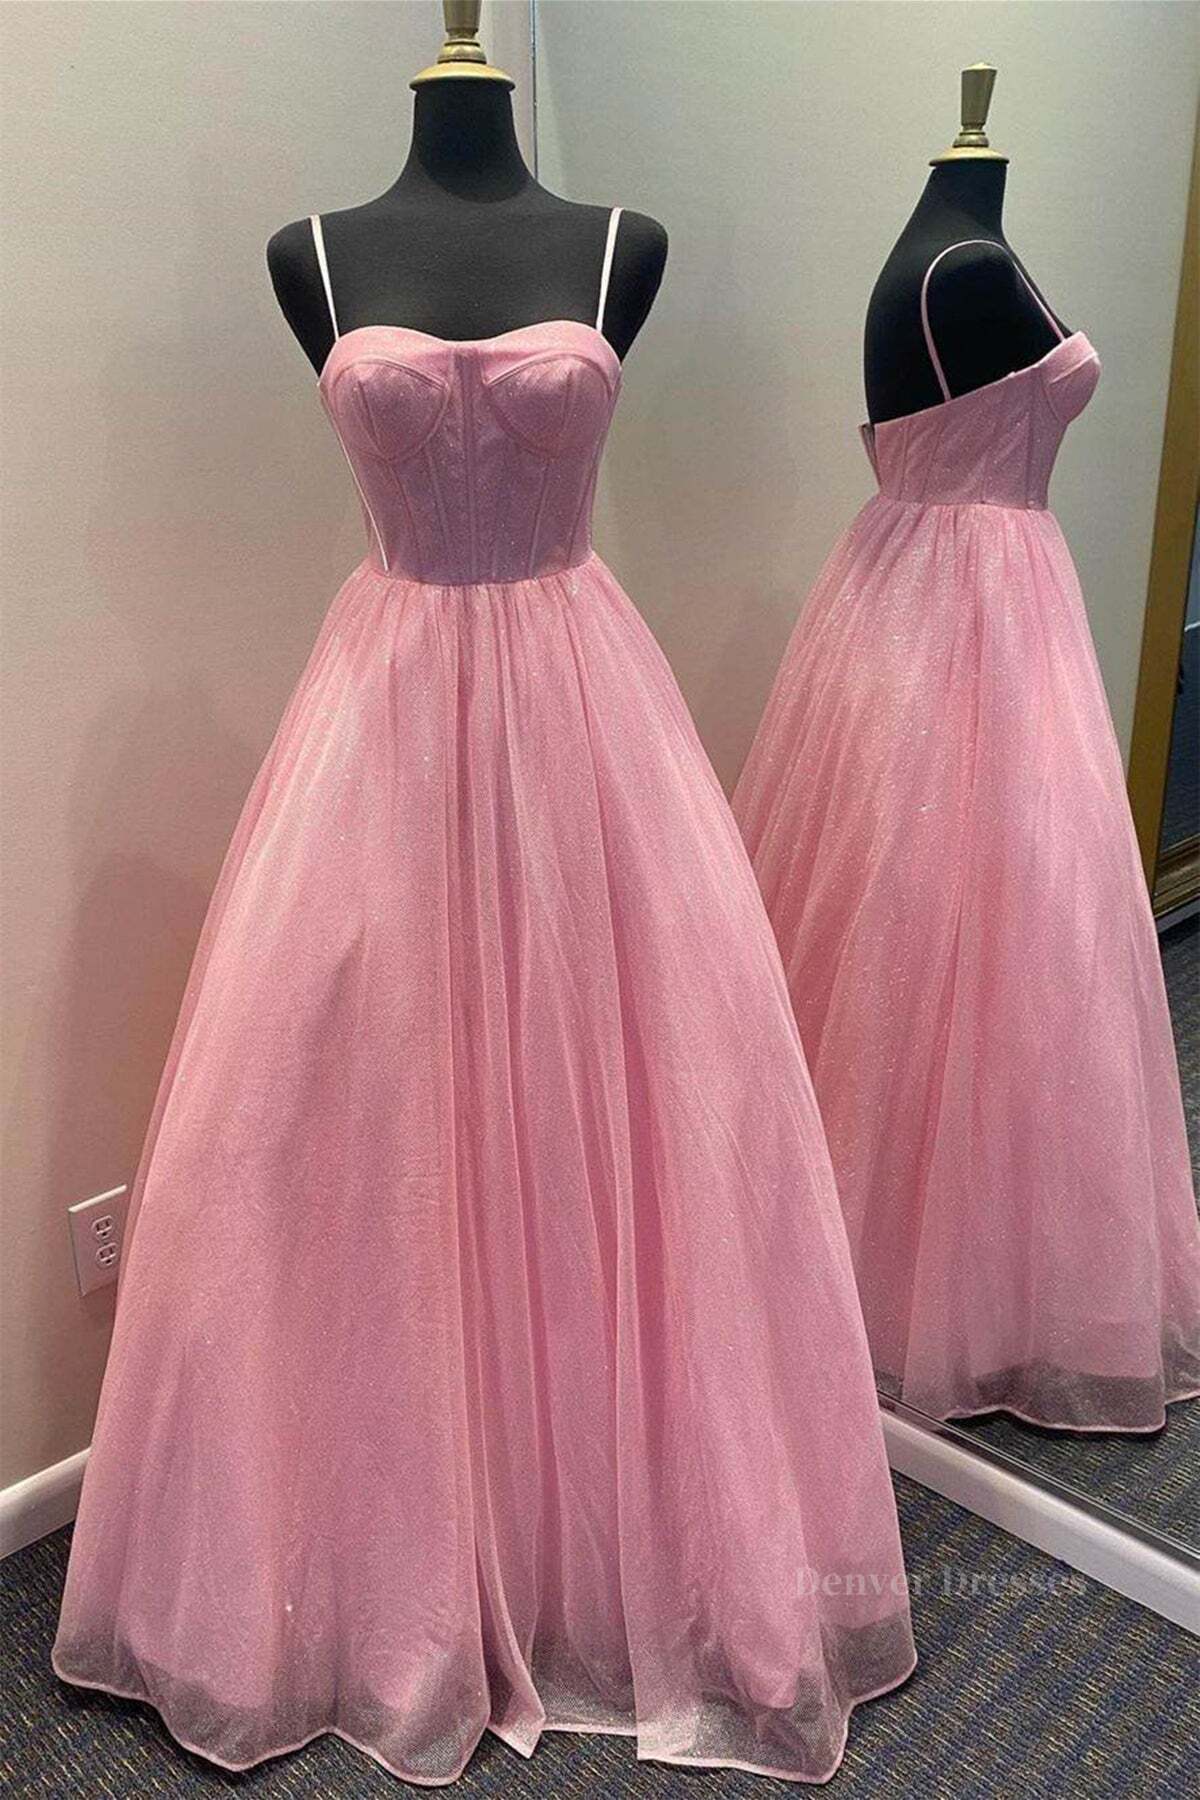 Party Outfit Night, Shiny Tulle Open Back Long Prom Dress, Long Tulle Formal Graduation Evening Dress